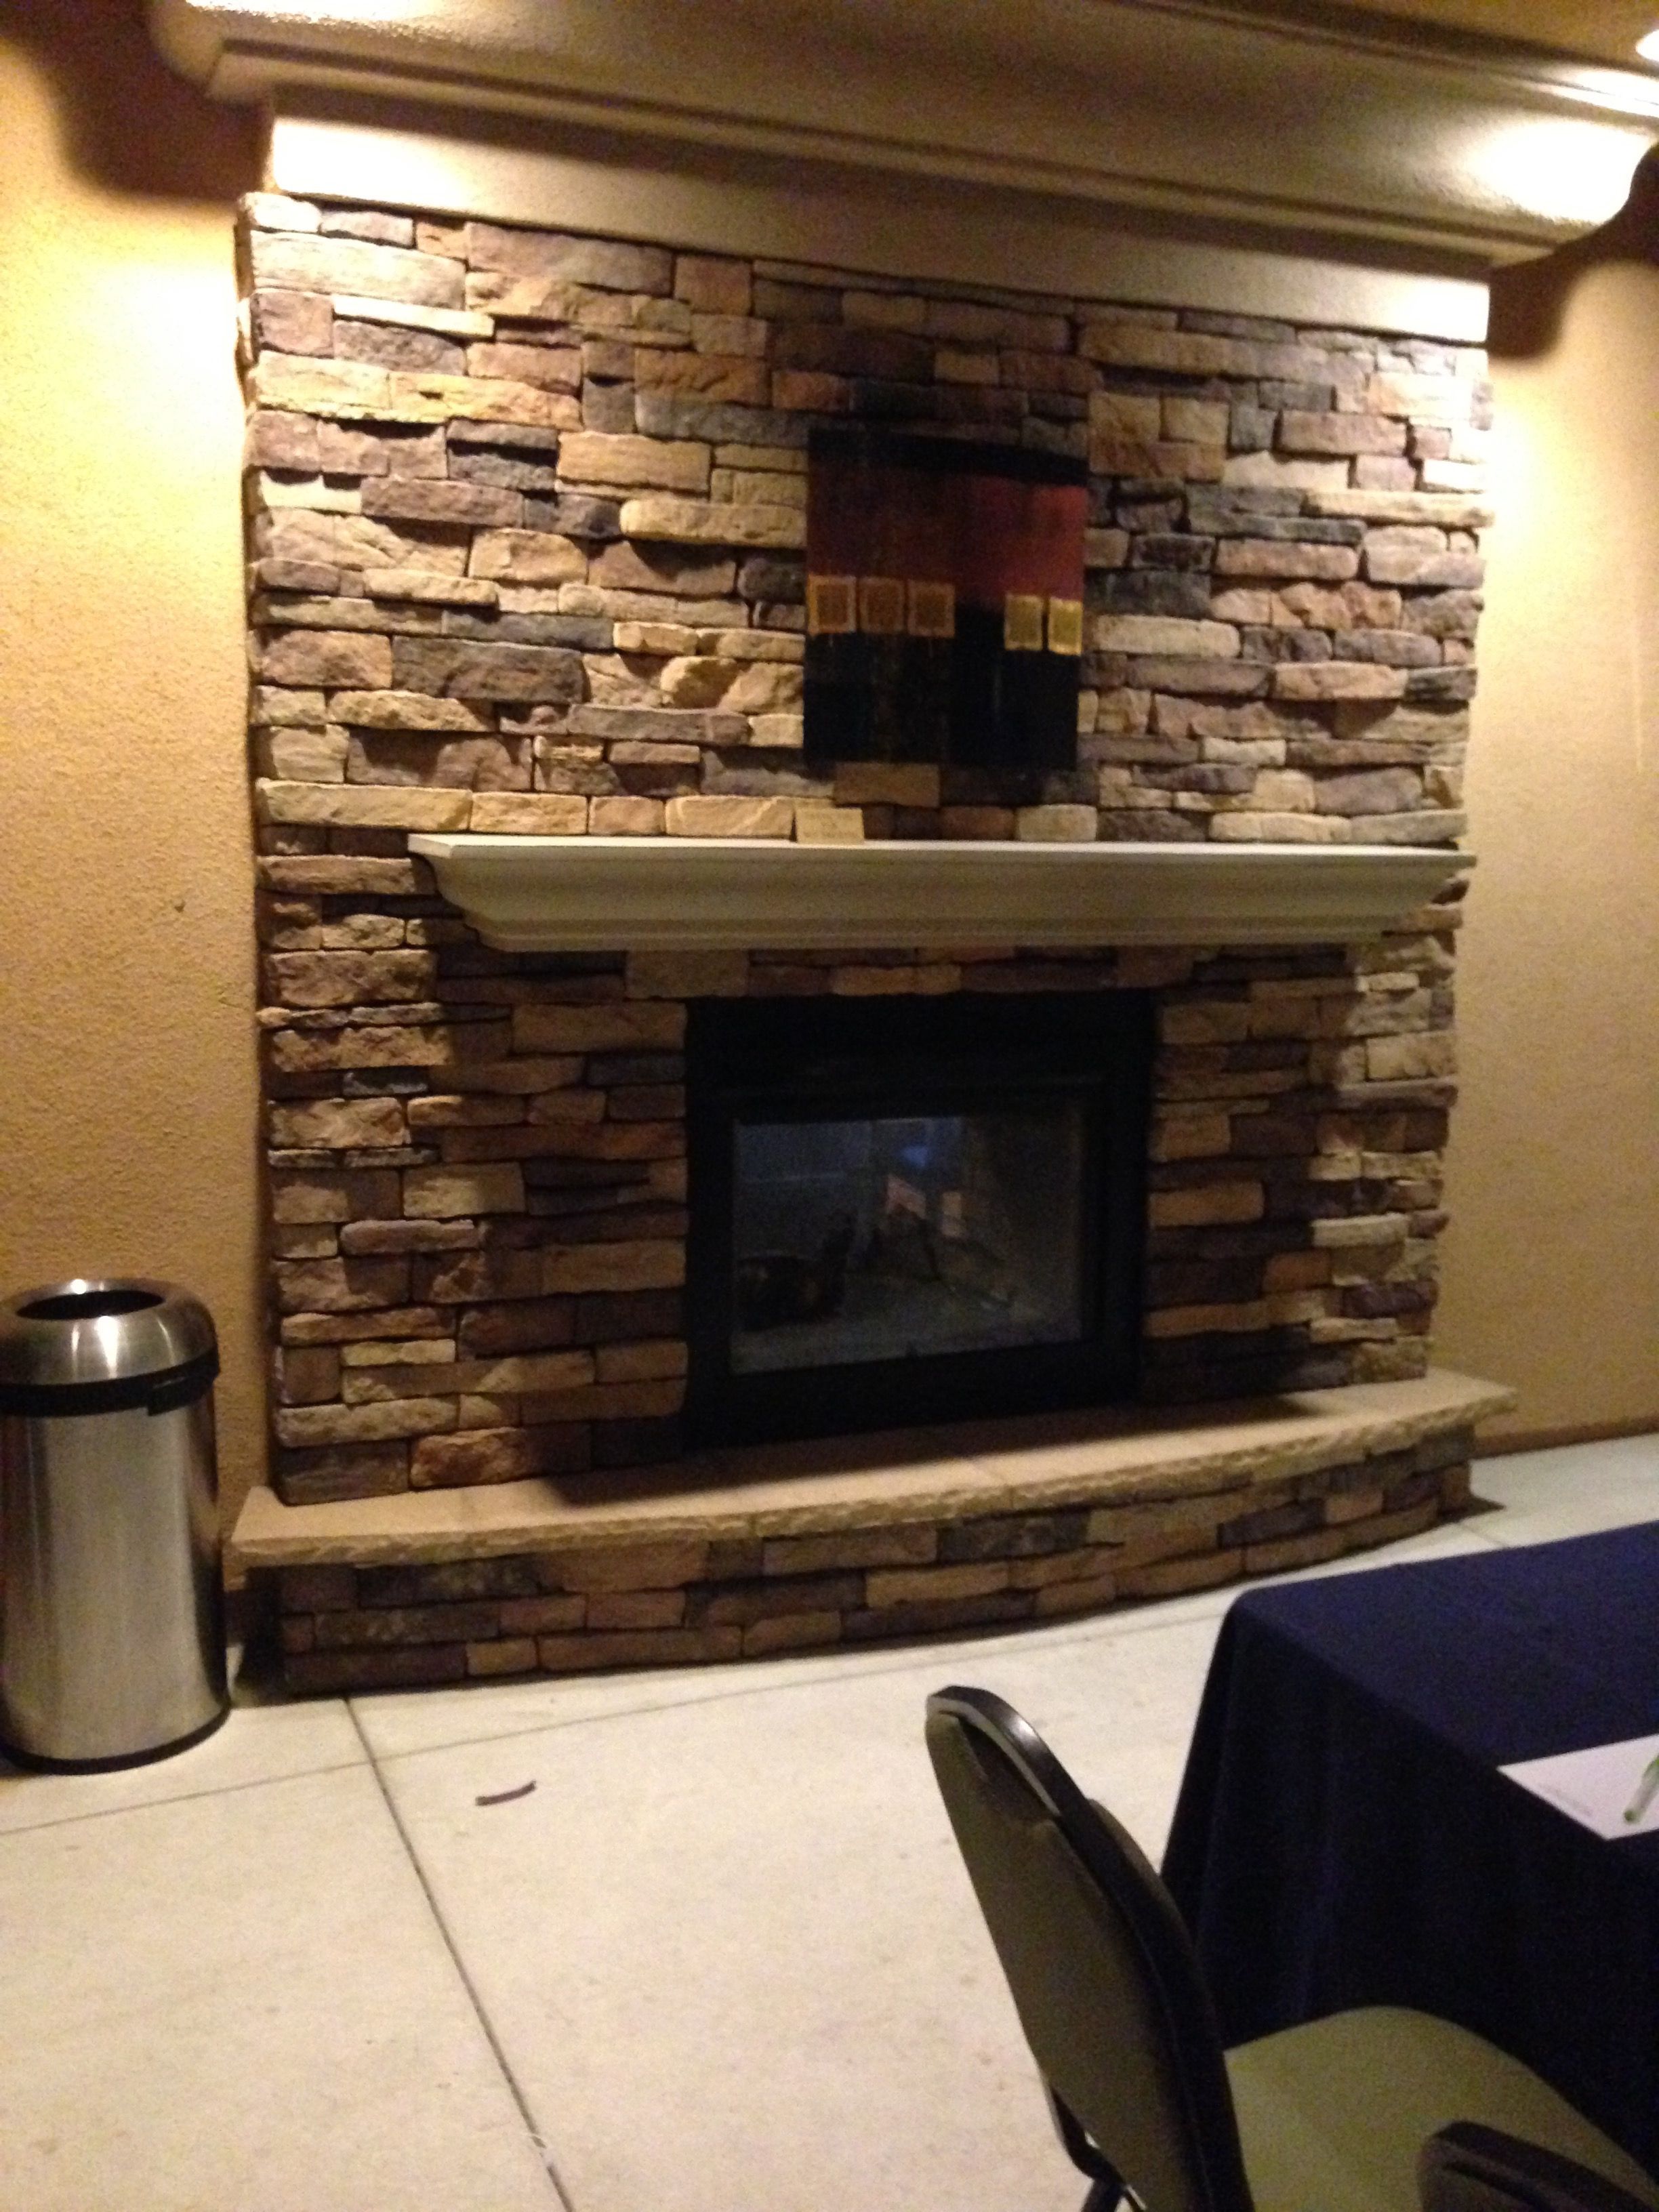 Fireplace Mantel Shelf Lowes Best Of I Like the Smaller Hearth Mildly Curved I Don T Like when